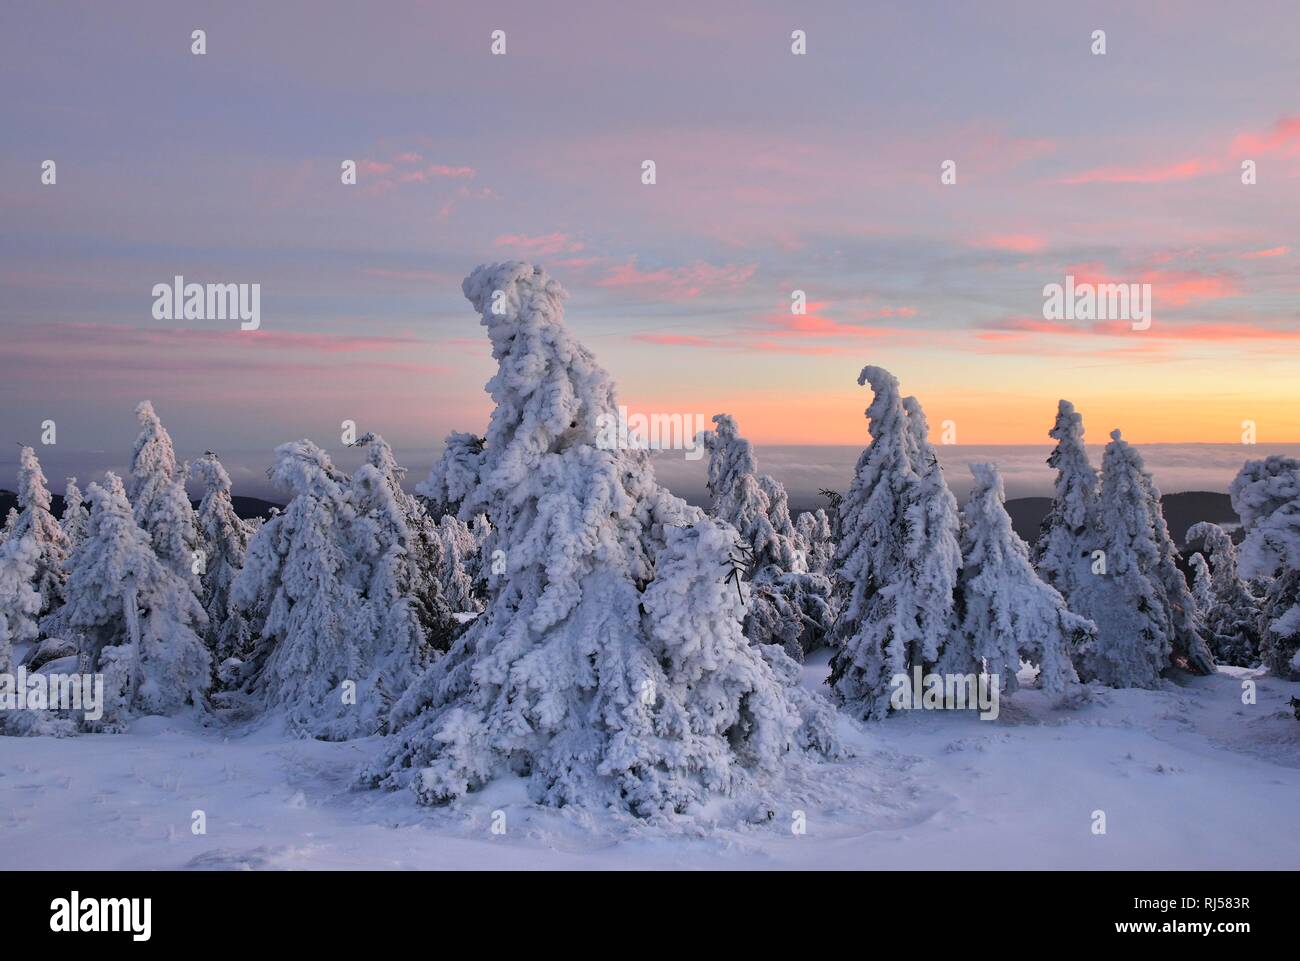 Snow-covered spruces on the Brocken, afterglow, Harz National Park, Saxony-Anhalt, Germany Stock Photo